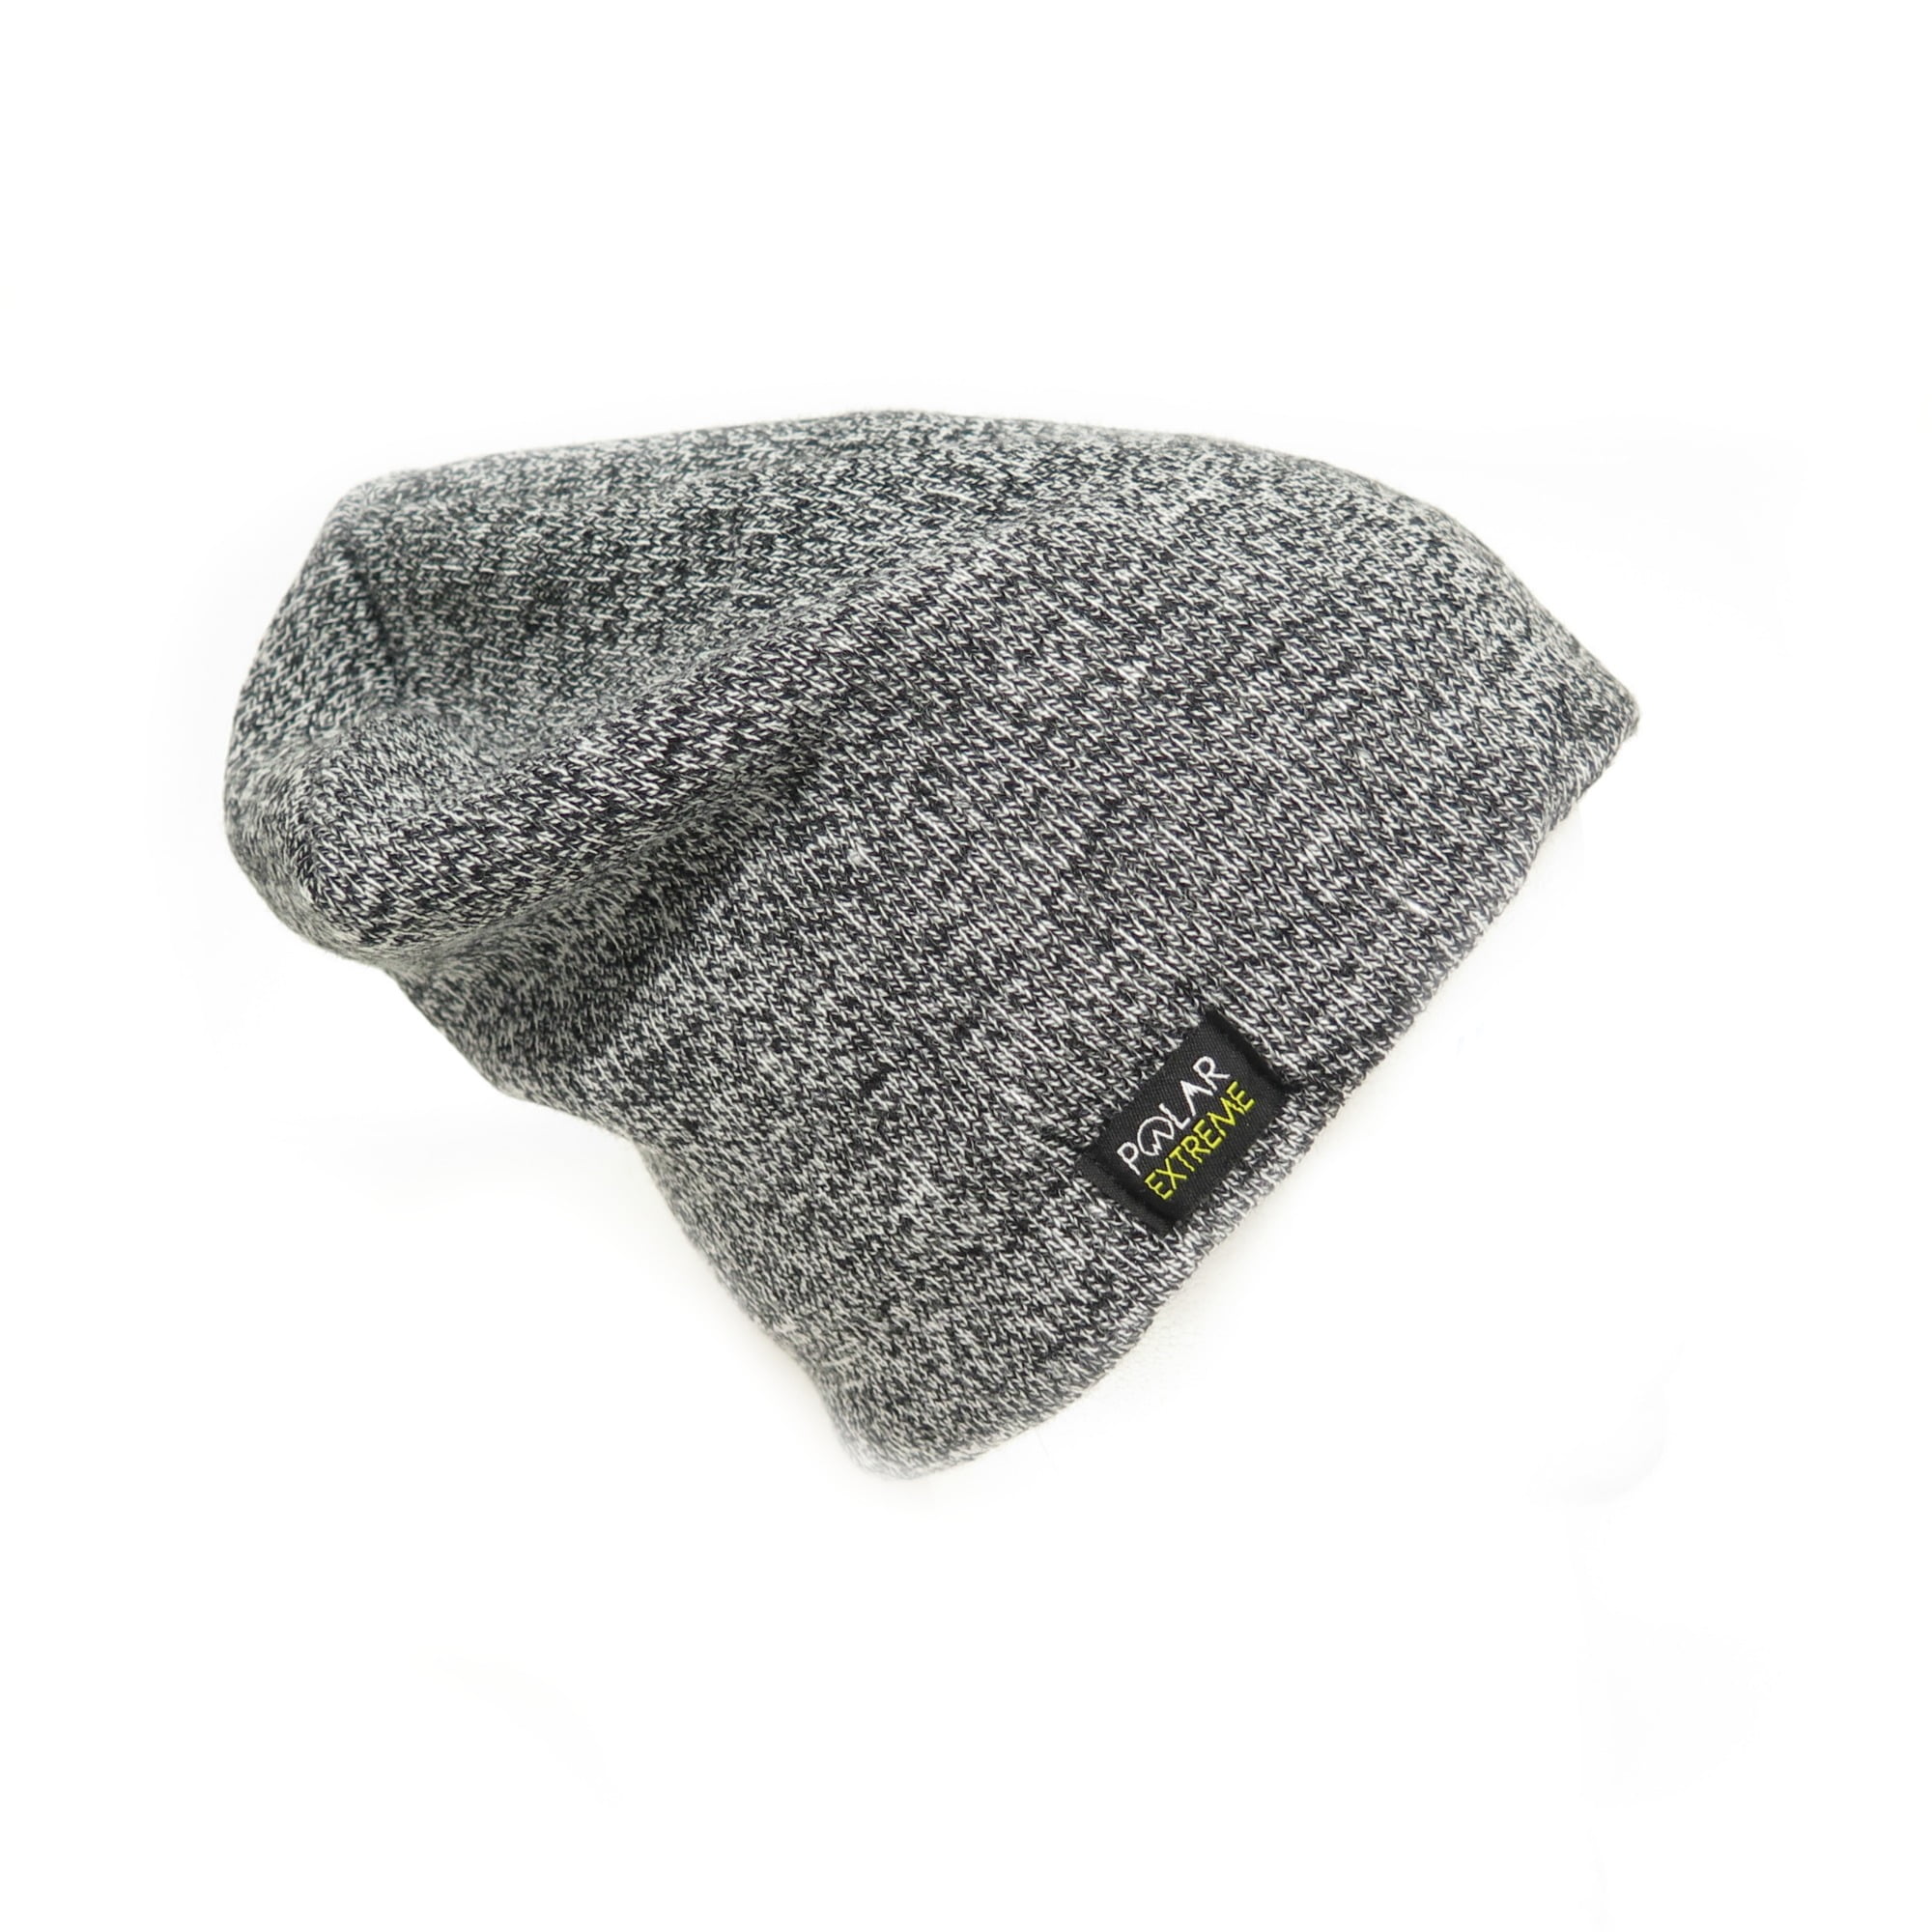 Details about   Milwaukee 502G Gray Fleece Lined Beanie 